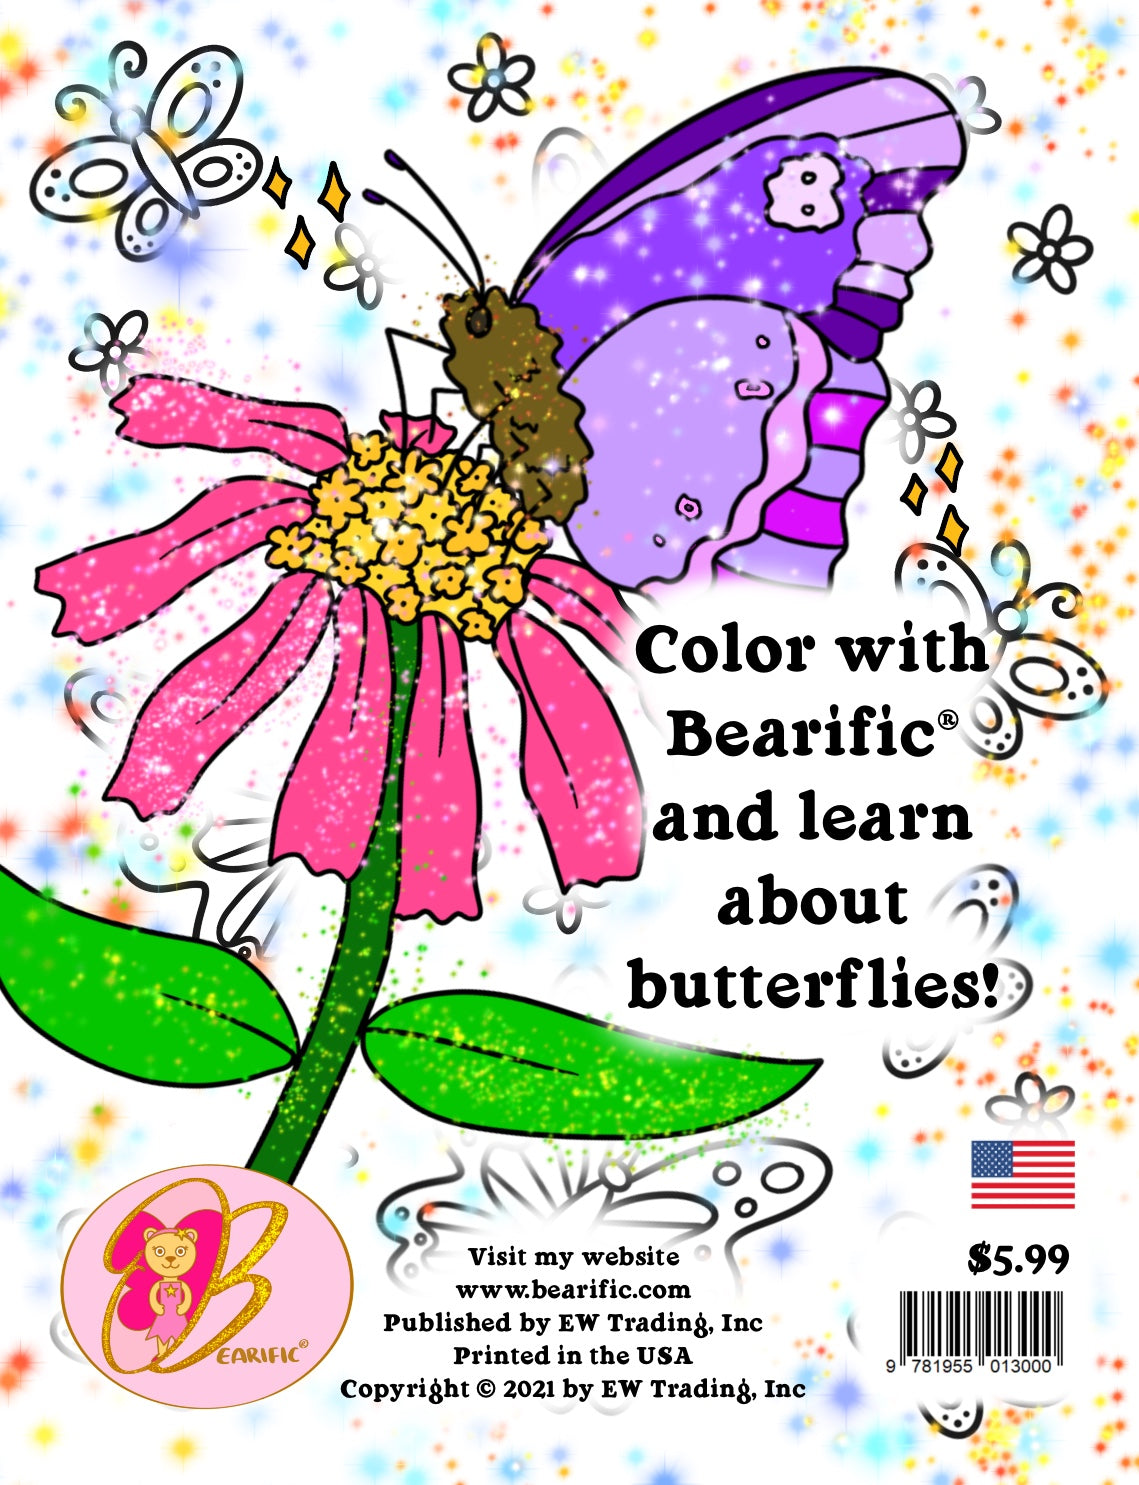 Bearific's® Coloring Book: Butterfly Edition